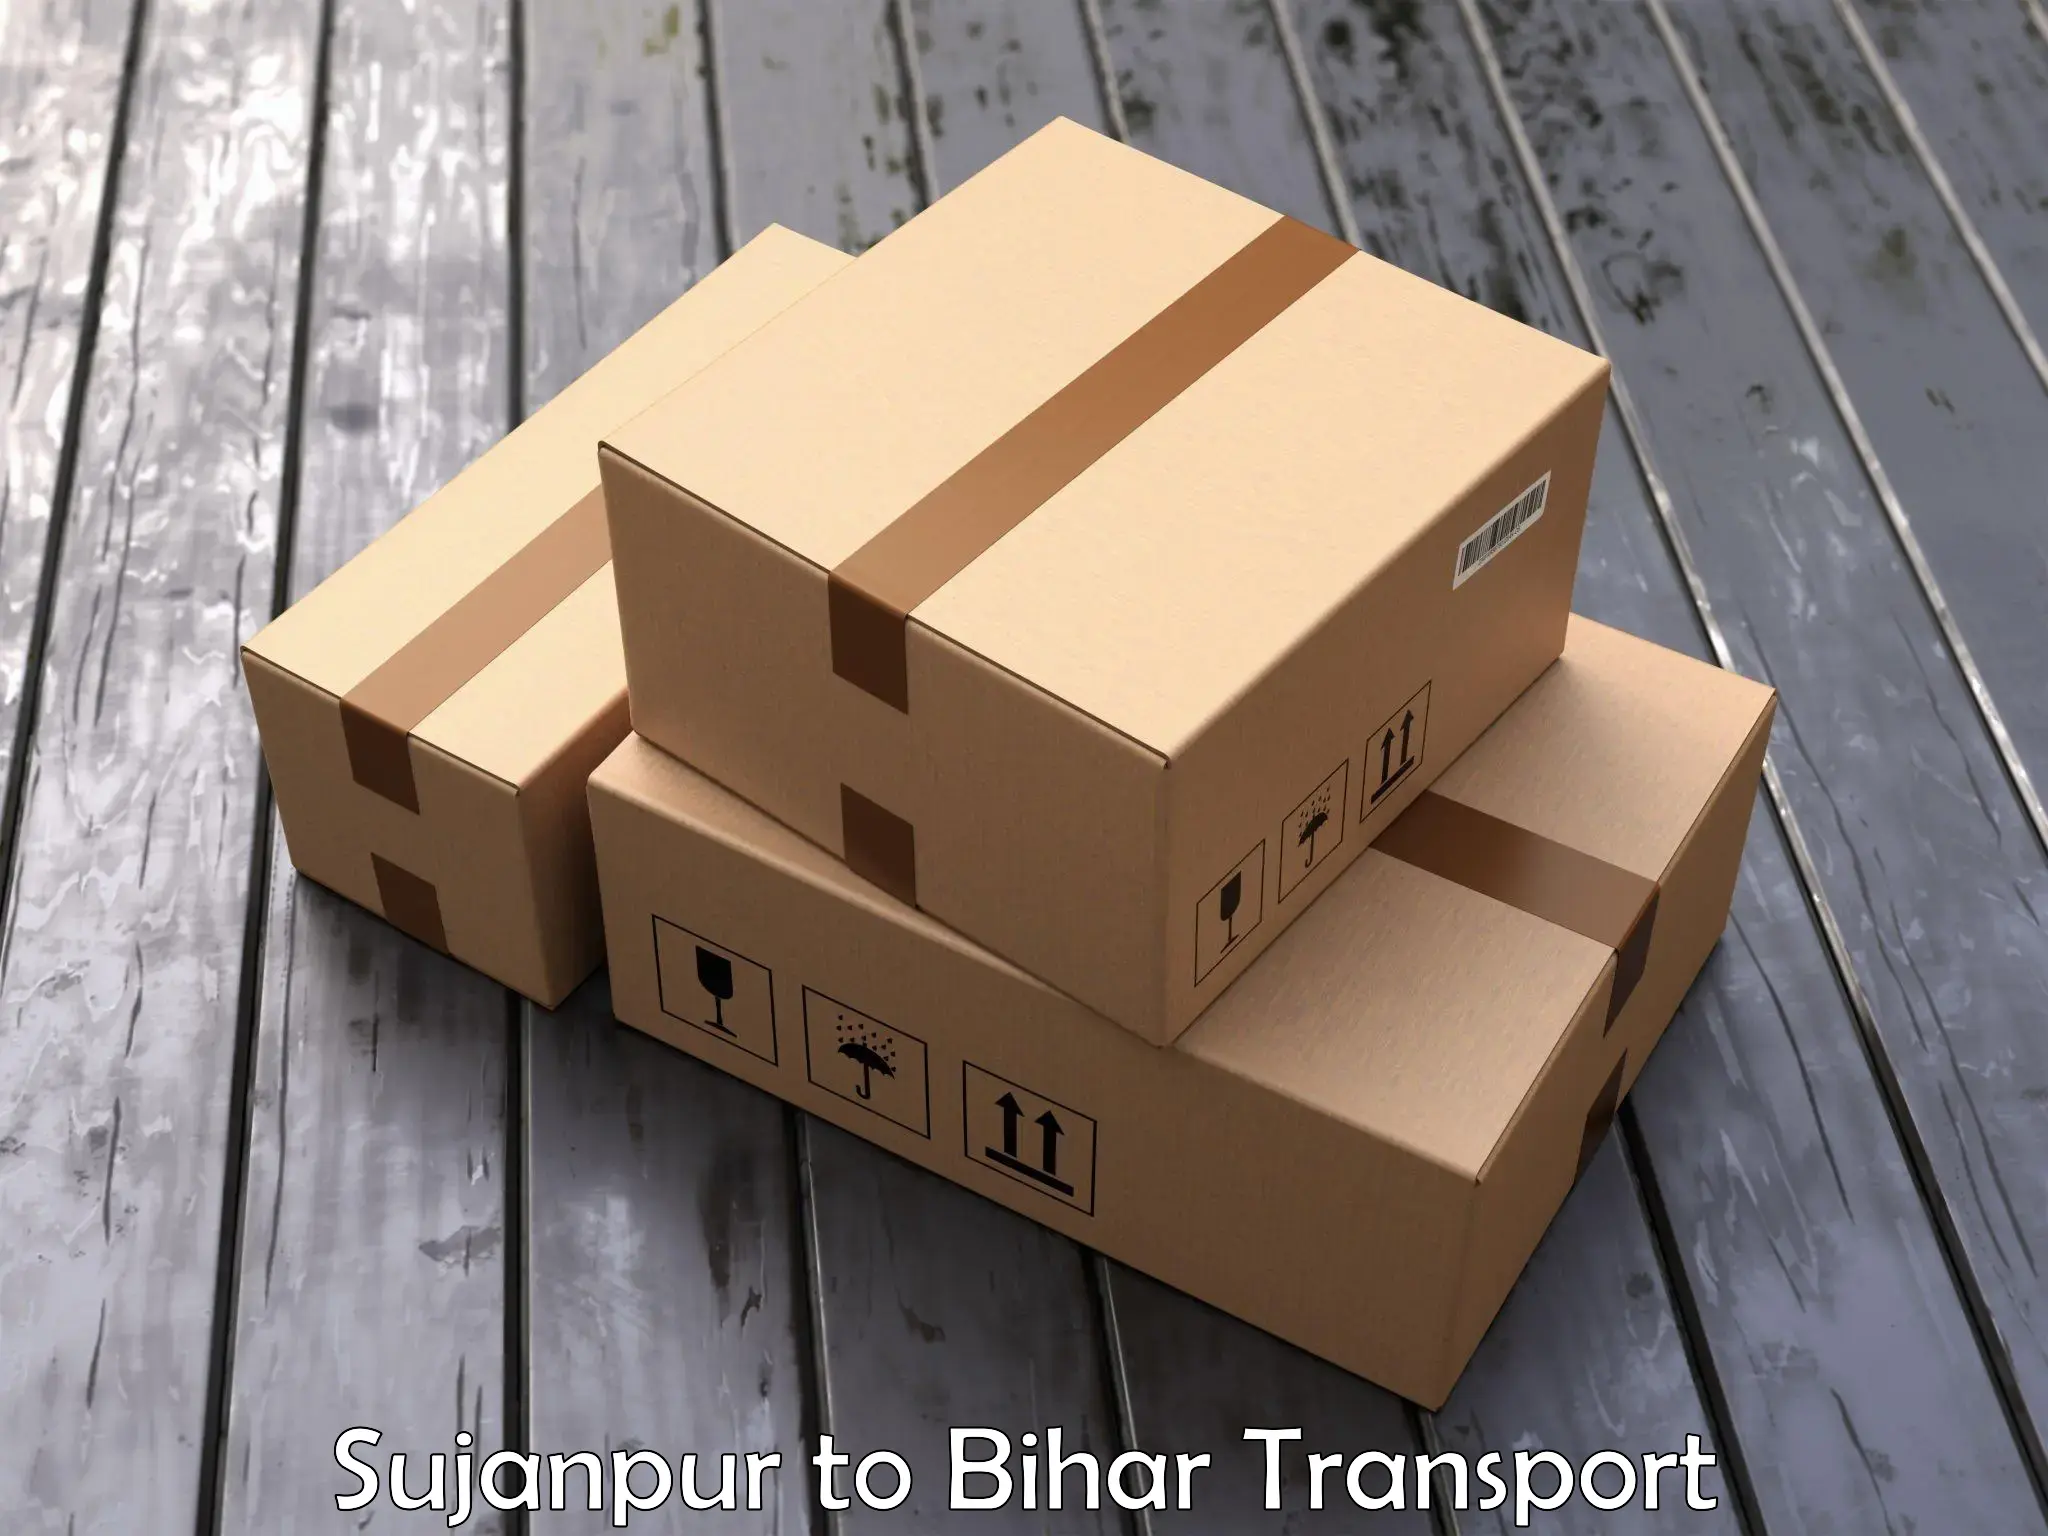 Nearby transport service Sujanpur to Bihar